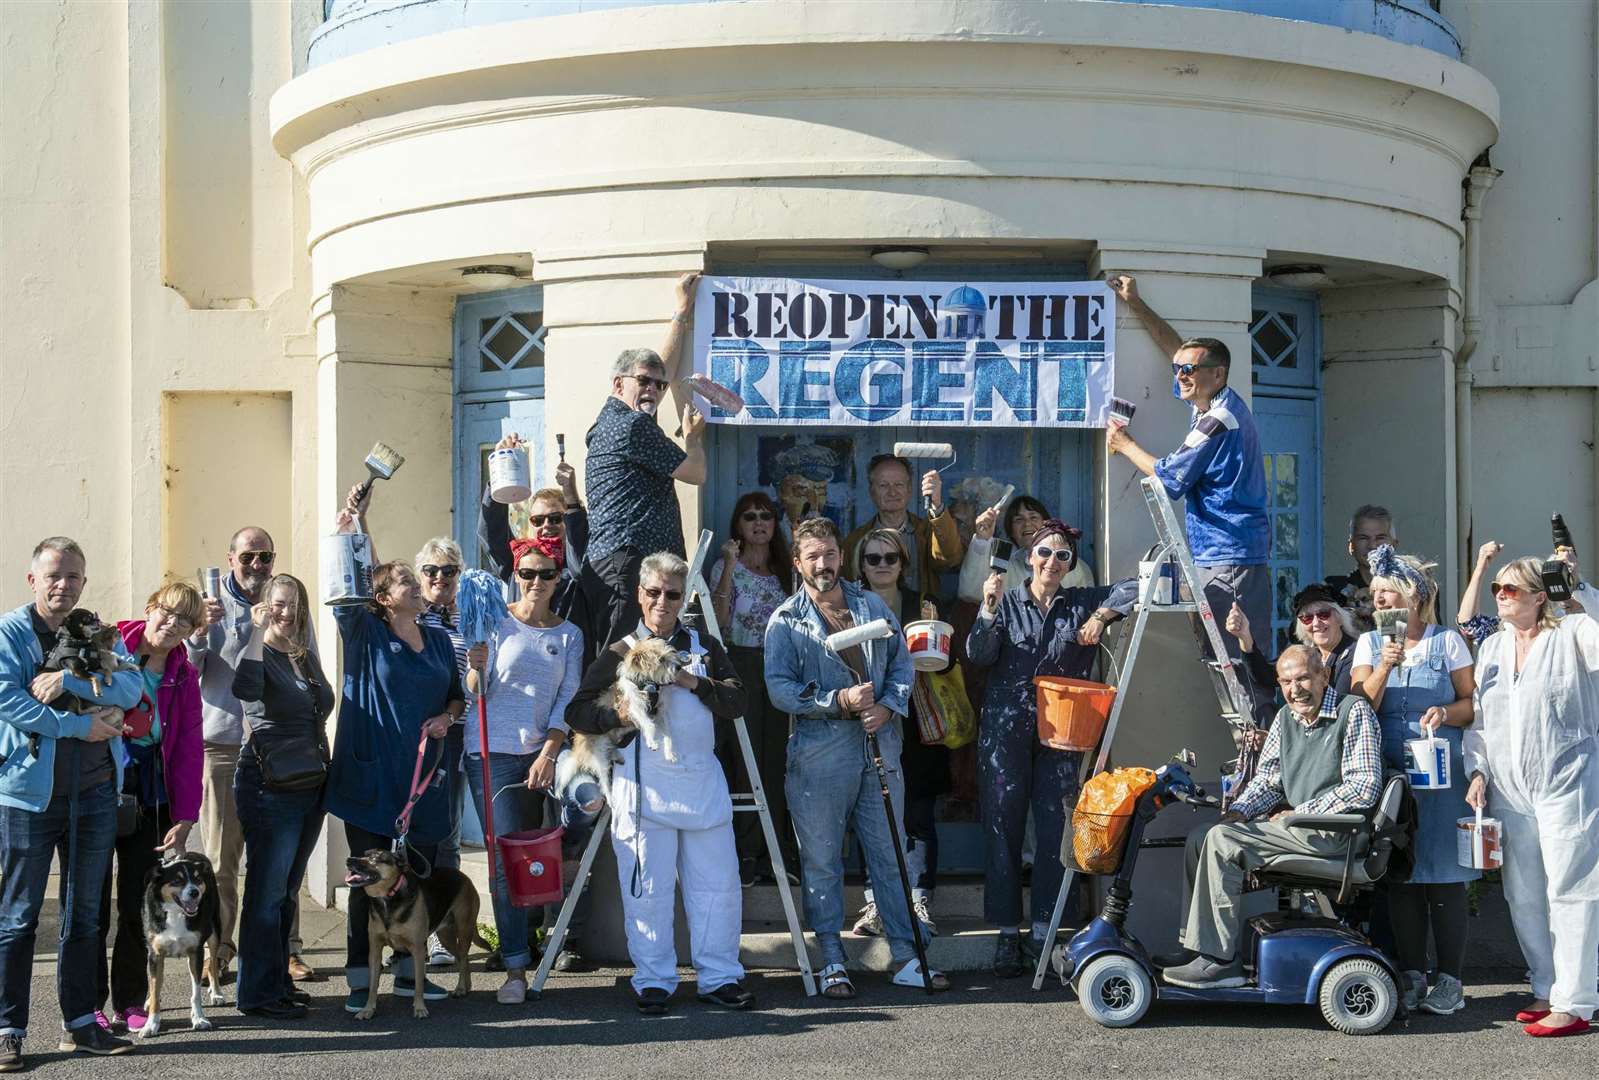 A previous protest held by Reopen the Regent in 2018 Picture: Tony Nandi